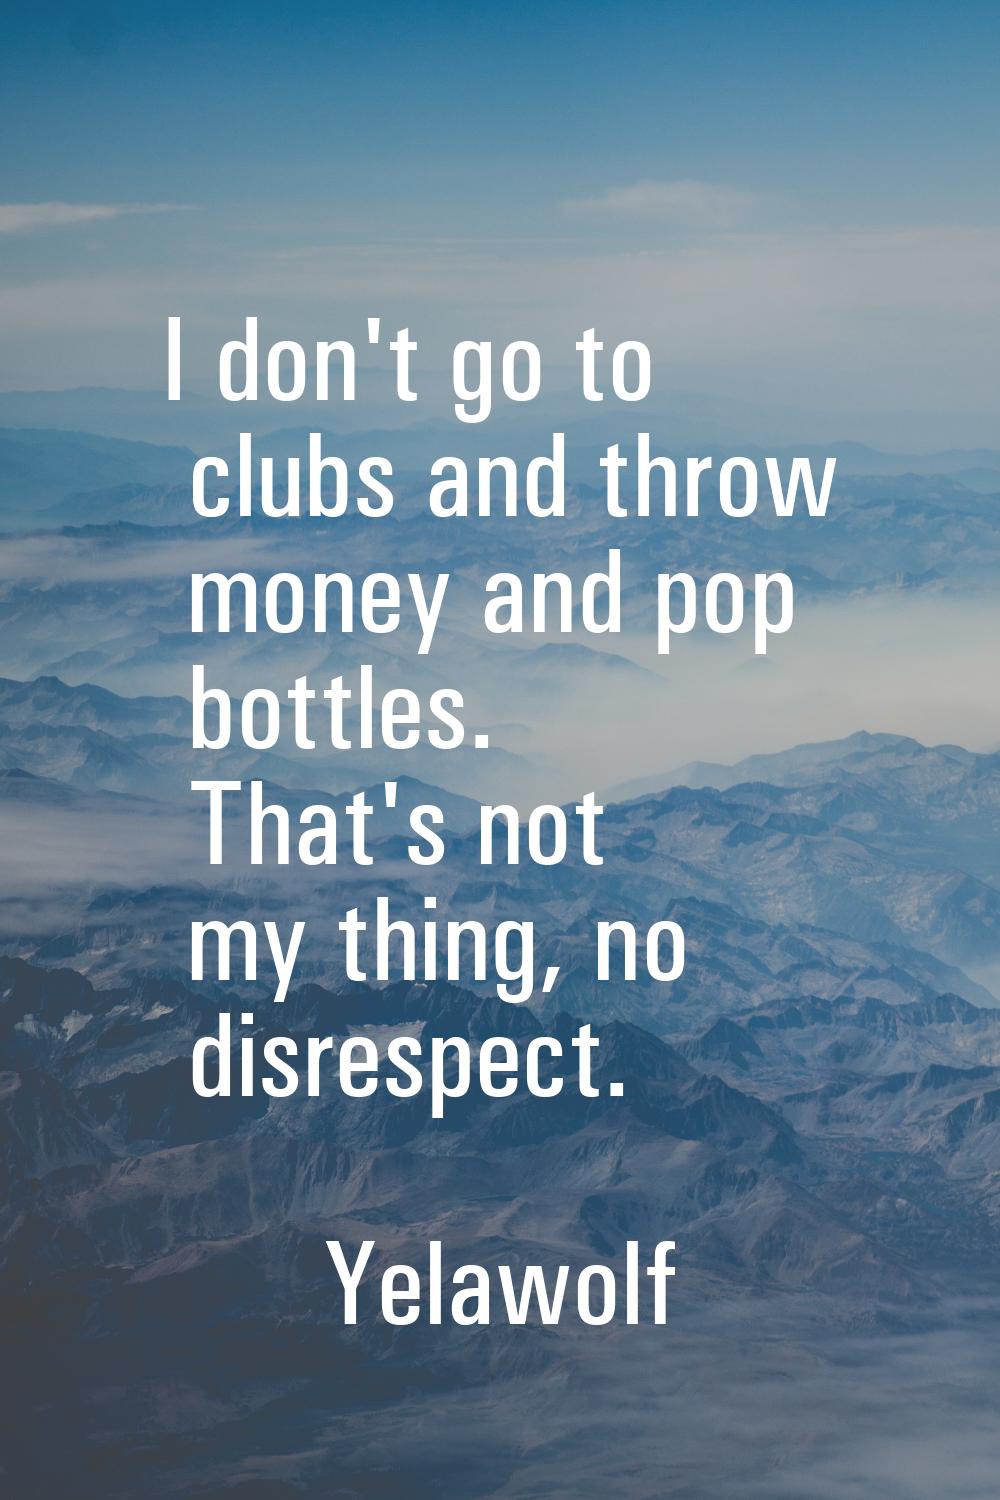 I don't go to clubs and throw money and pop bottles. That's not my thing, no disrespect.